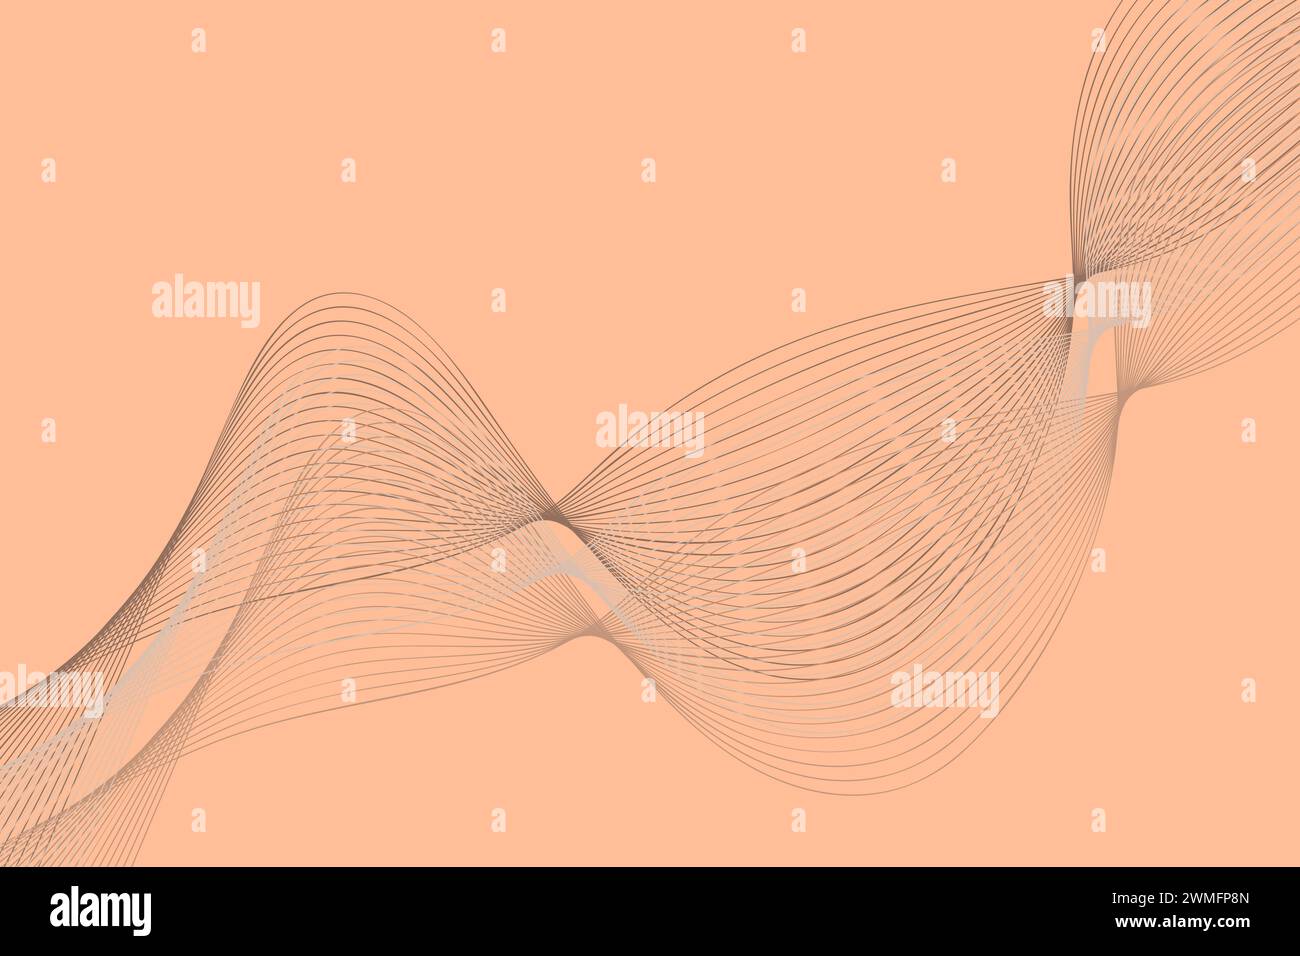 Dynamic waves are depicted vividly against a soft peach background. The wave appears to be in motion, with intricate details and a sense of movement captured in the design Stock Vector